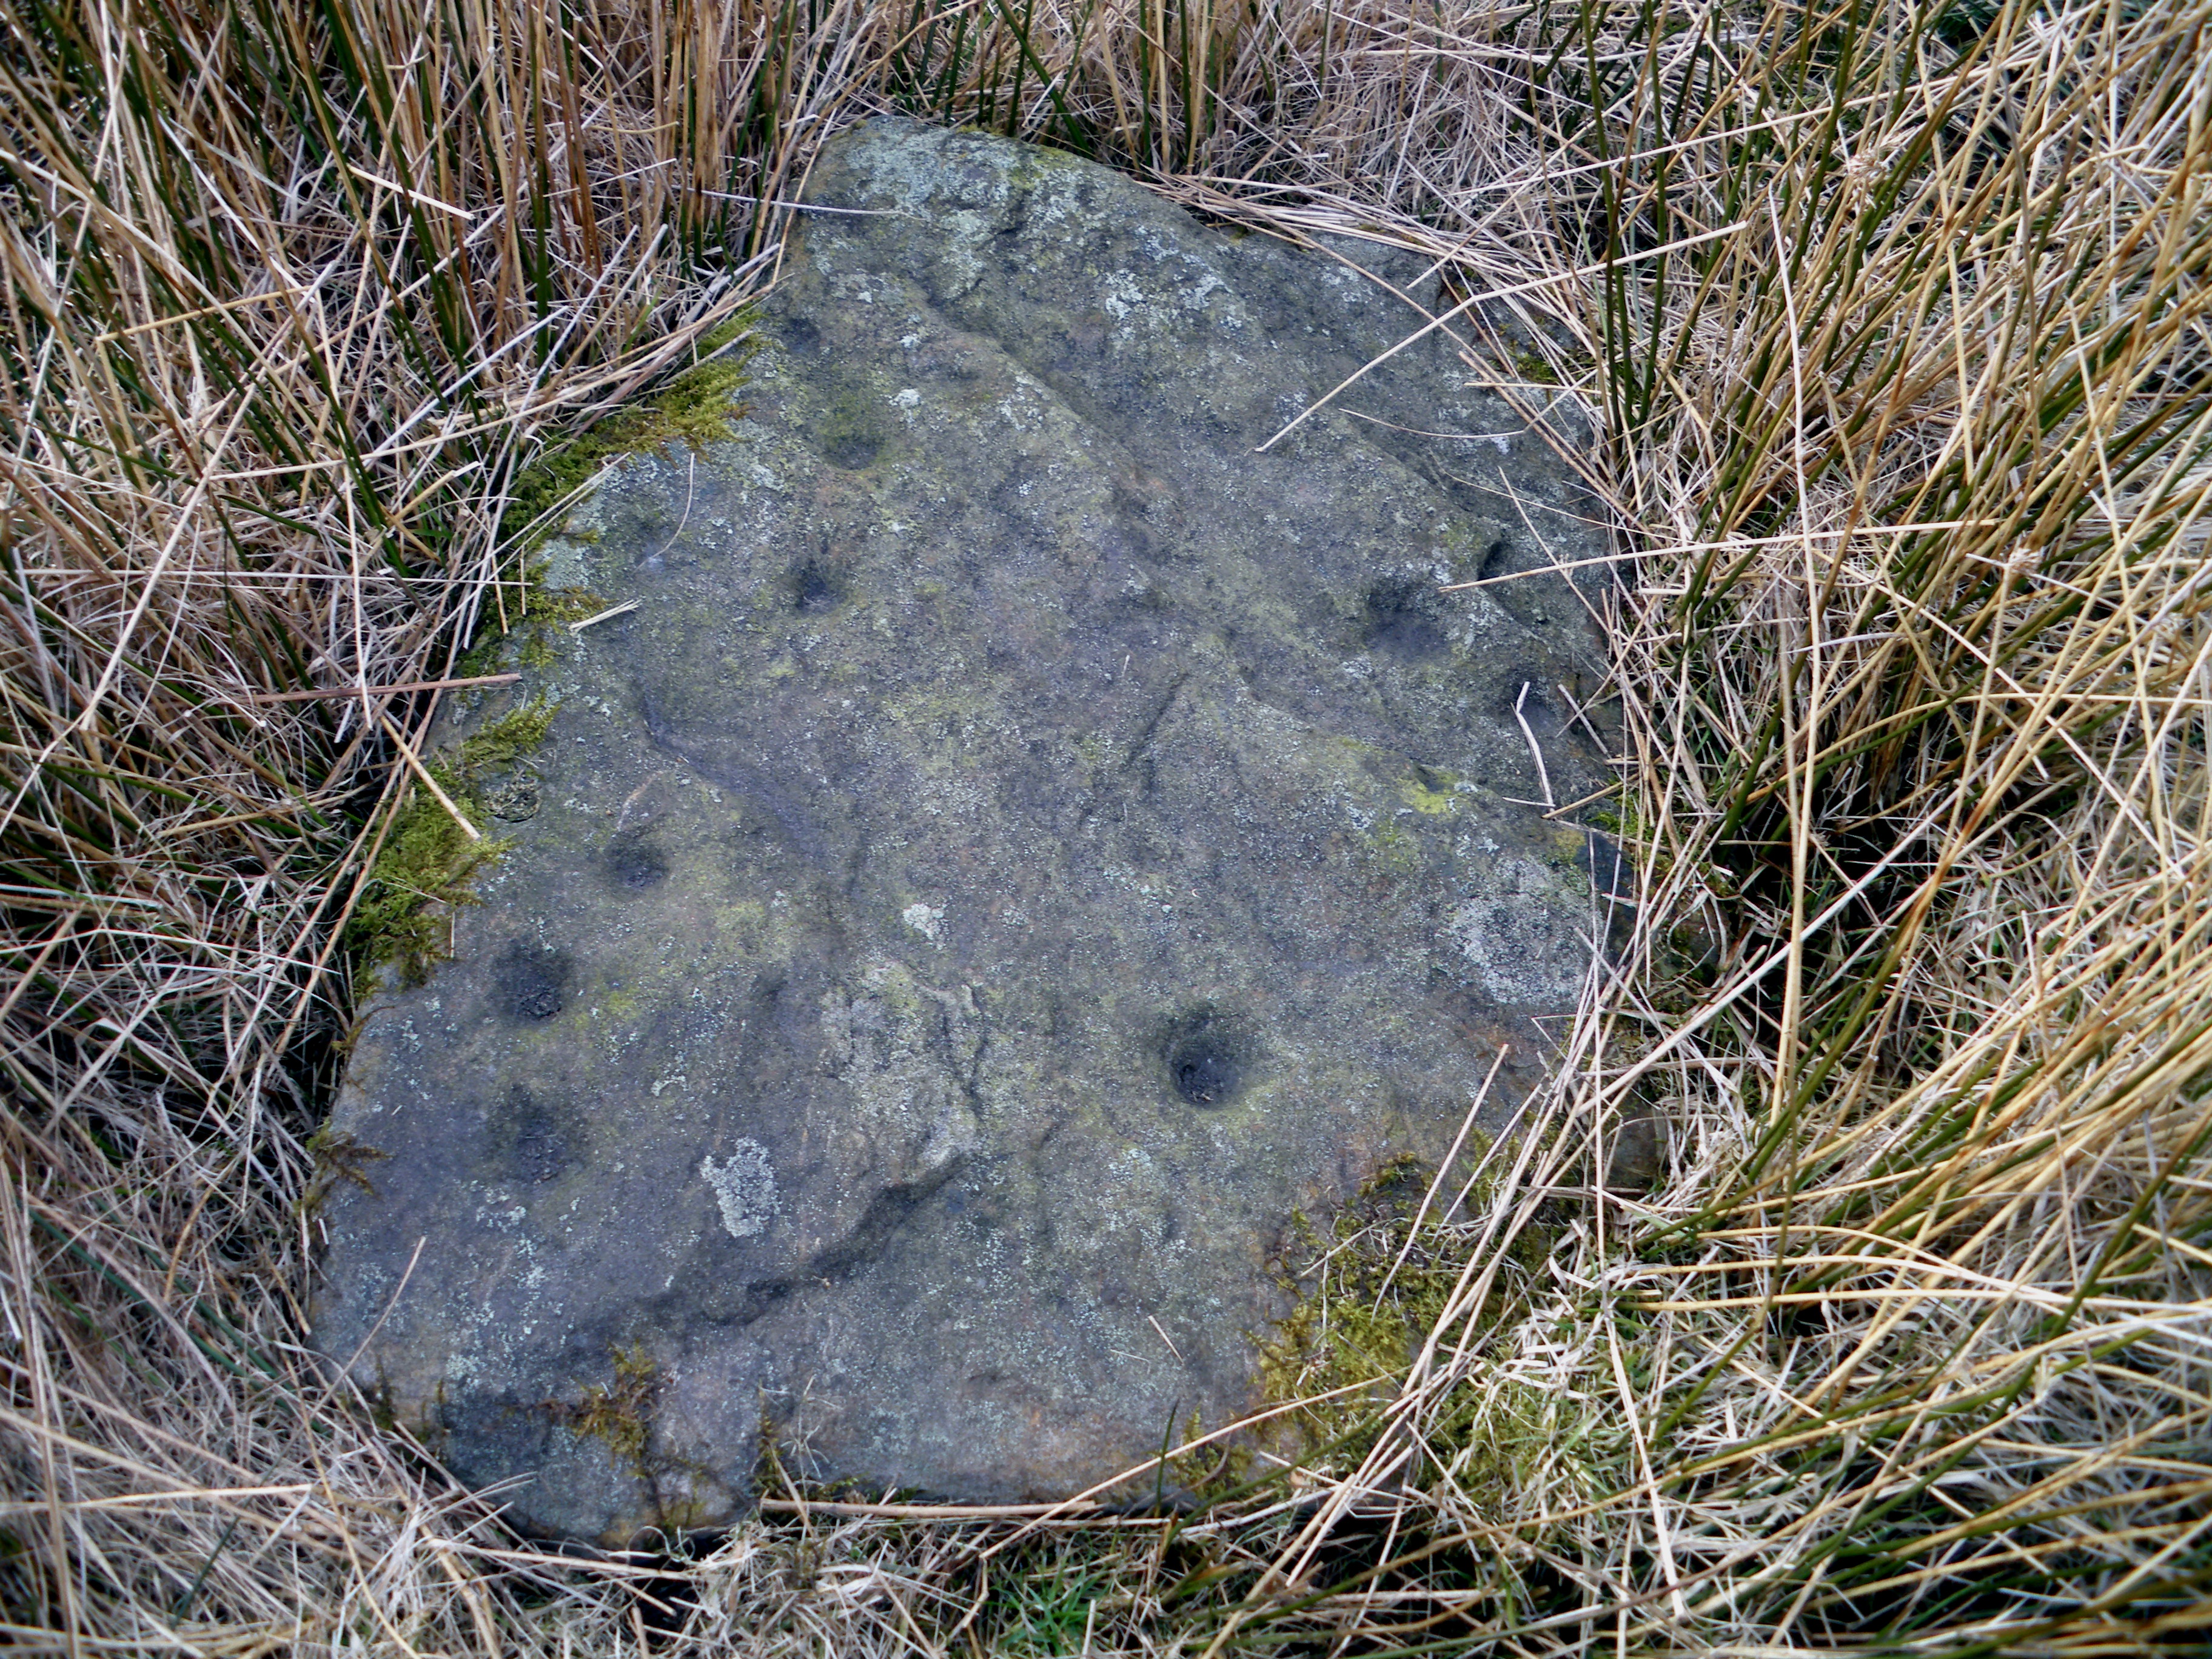 The Cup Marked Stone